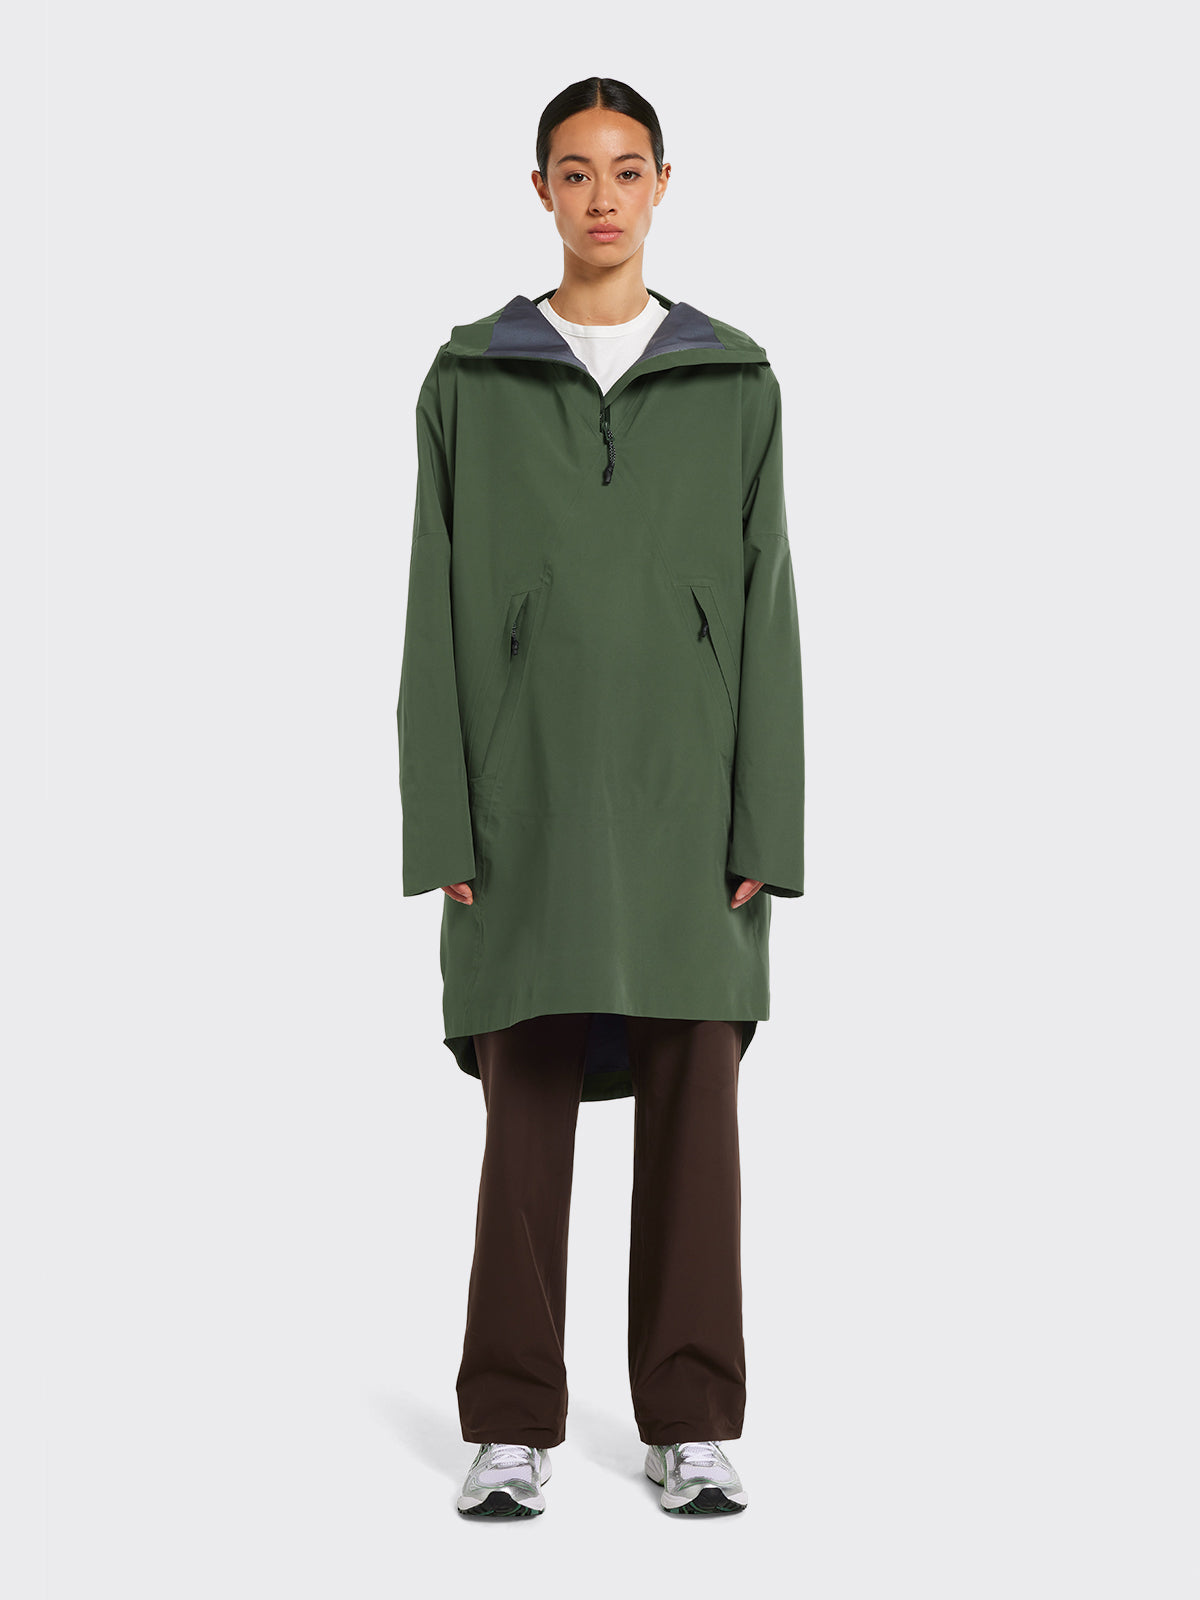 Woman wearing Aalesund poncho from Blæst in Dusty Green